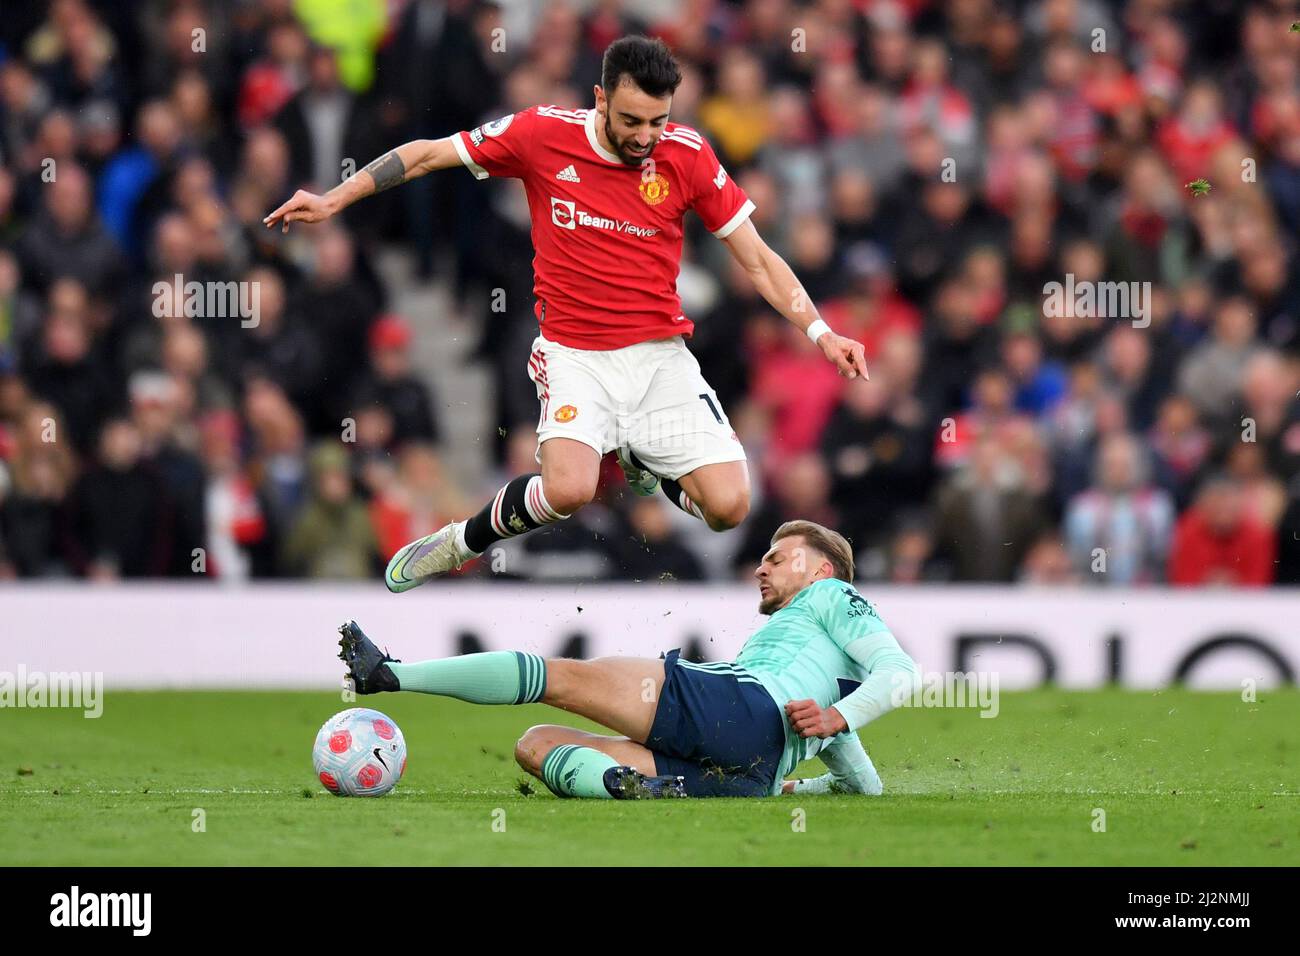 Manchester United's Bruno Fernandes is tackled by Leicester City's Kieran Dewsbury-Hall during the Premier League match at Old Trafford, Greater Manchester, UK. Picture date: Saturday April 2, 2022. Photo credit should read: Anthony Devlin Stock Photo